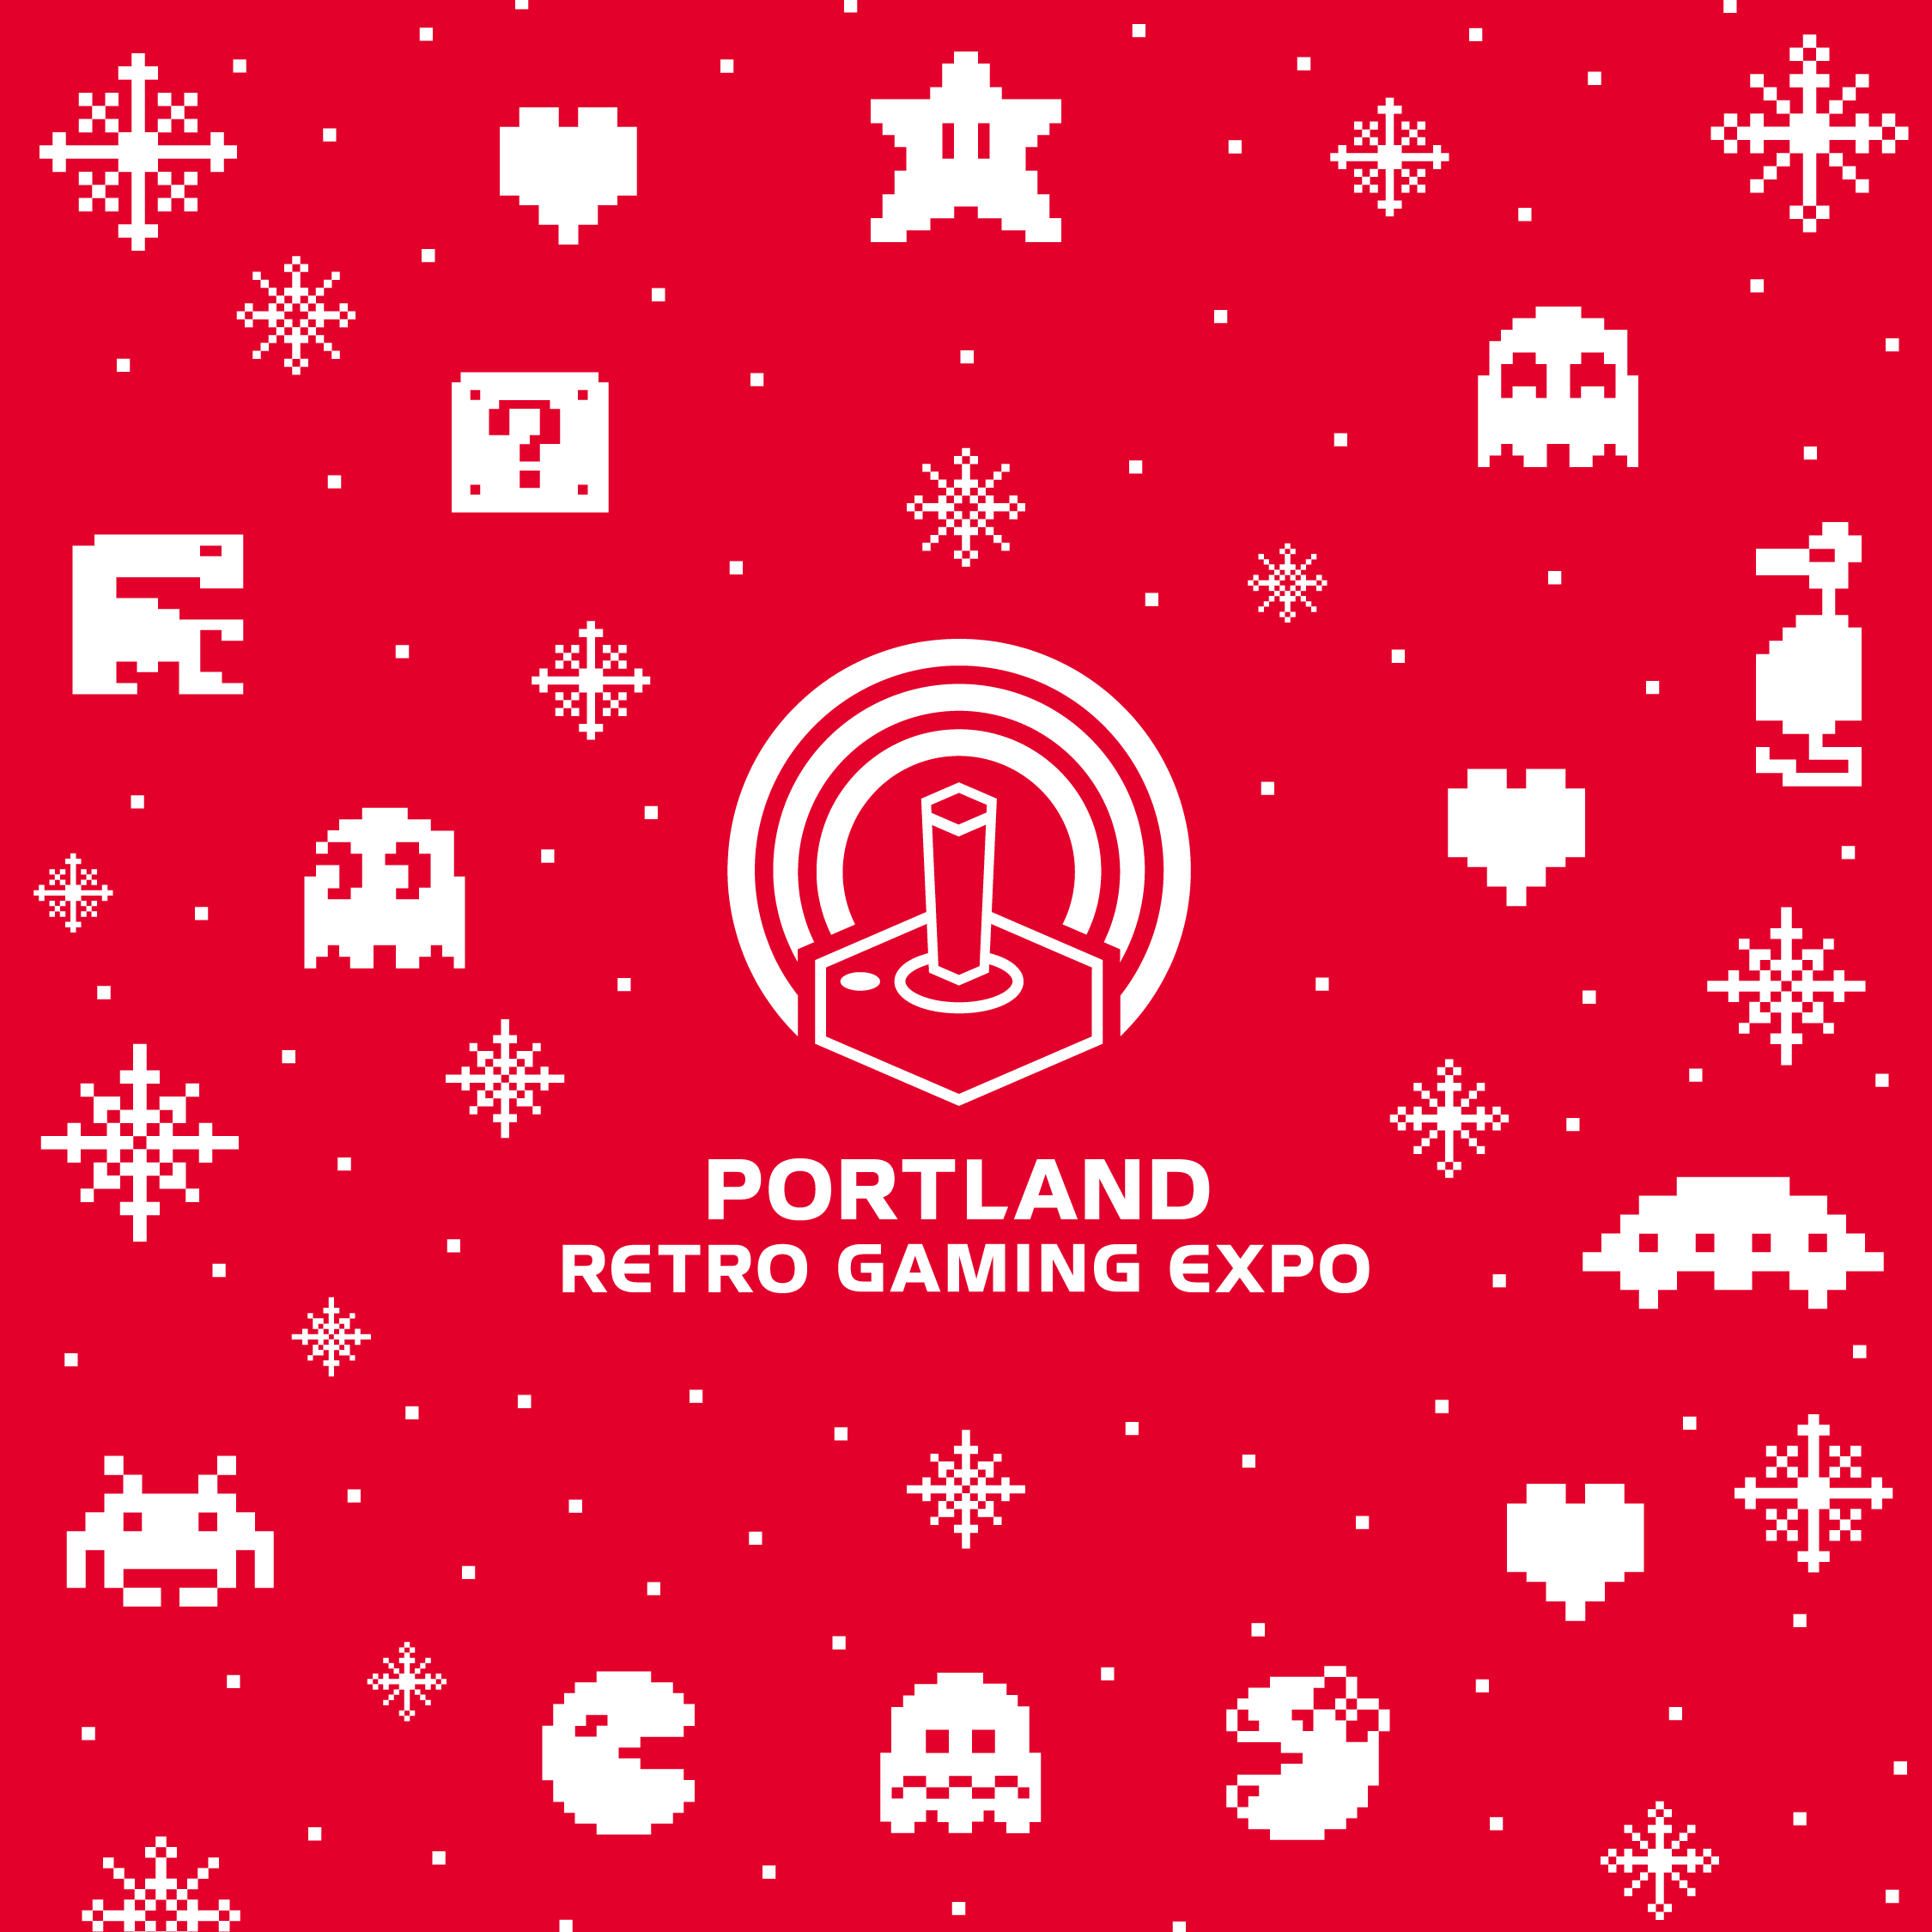 Portland Retro Gaming Expo - Classic Video Game Convention